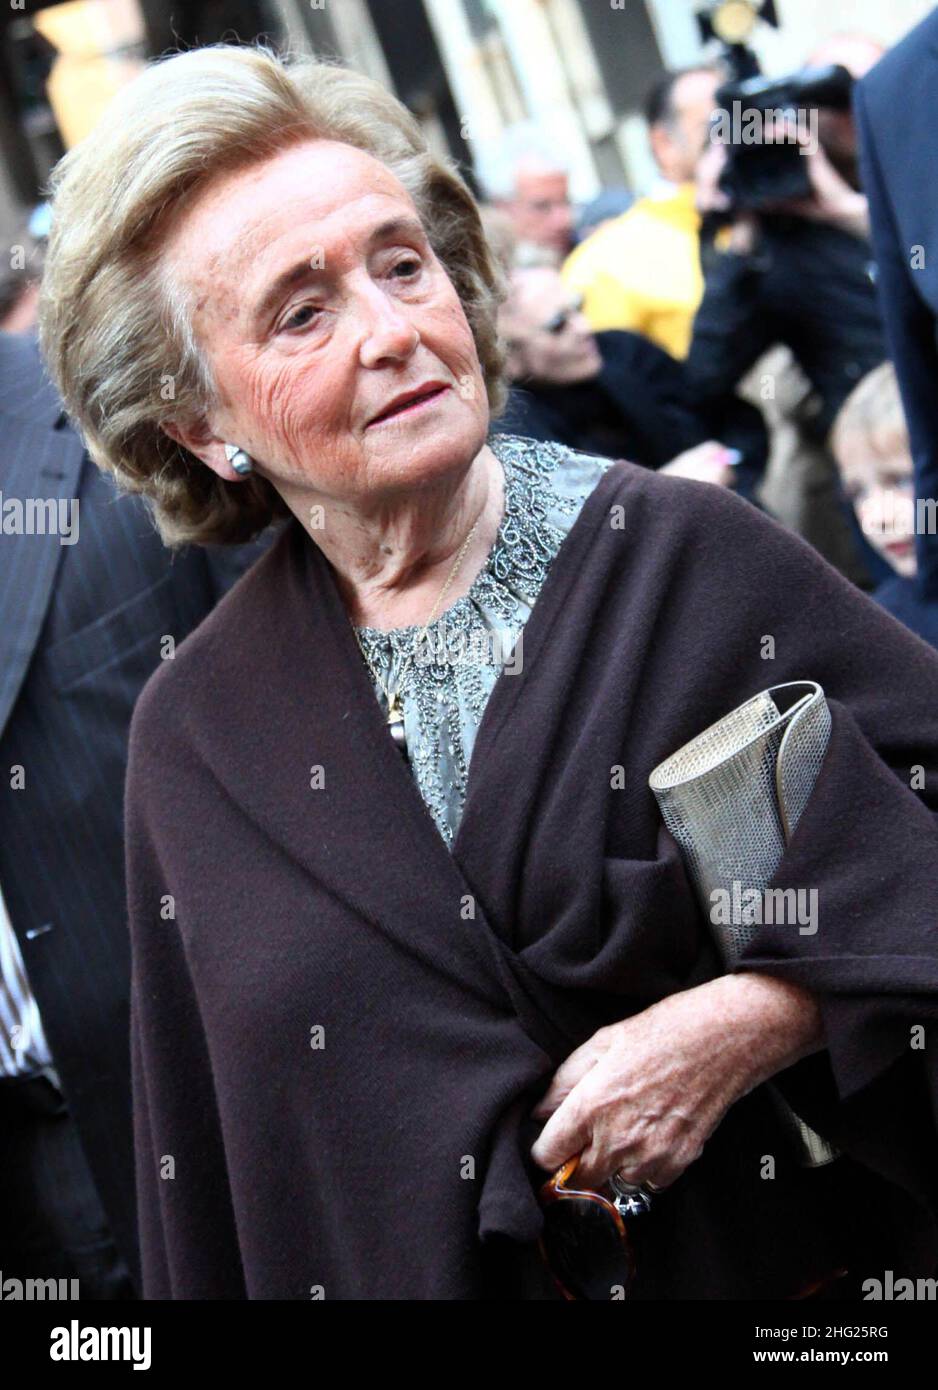 Bernadette Chirac, wife of french former president Jacques Chirac arrives for the wedding ceremony of actress Salma Hayek and businessman Francois-Henri Pinault at the 'La Fenice' Theatre, in Venice, Italy on Saturday, April 25, 2009. Stock Photo